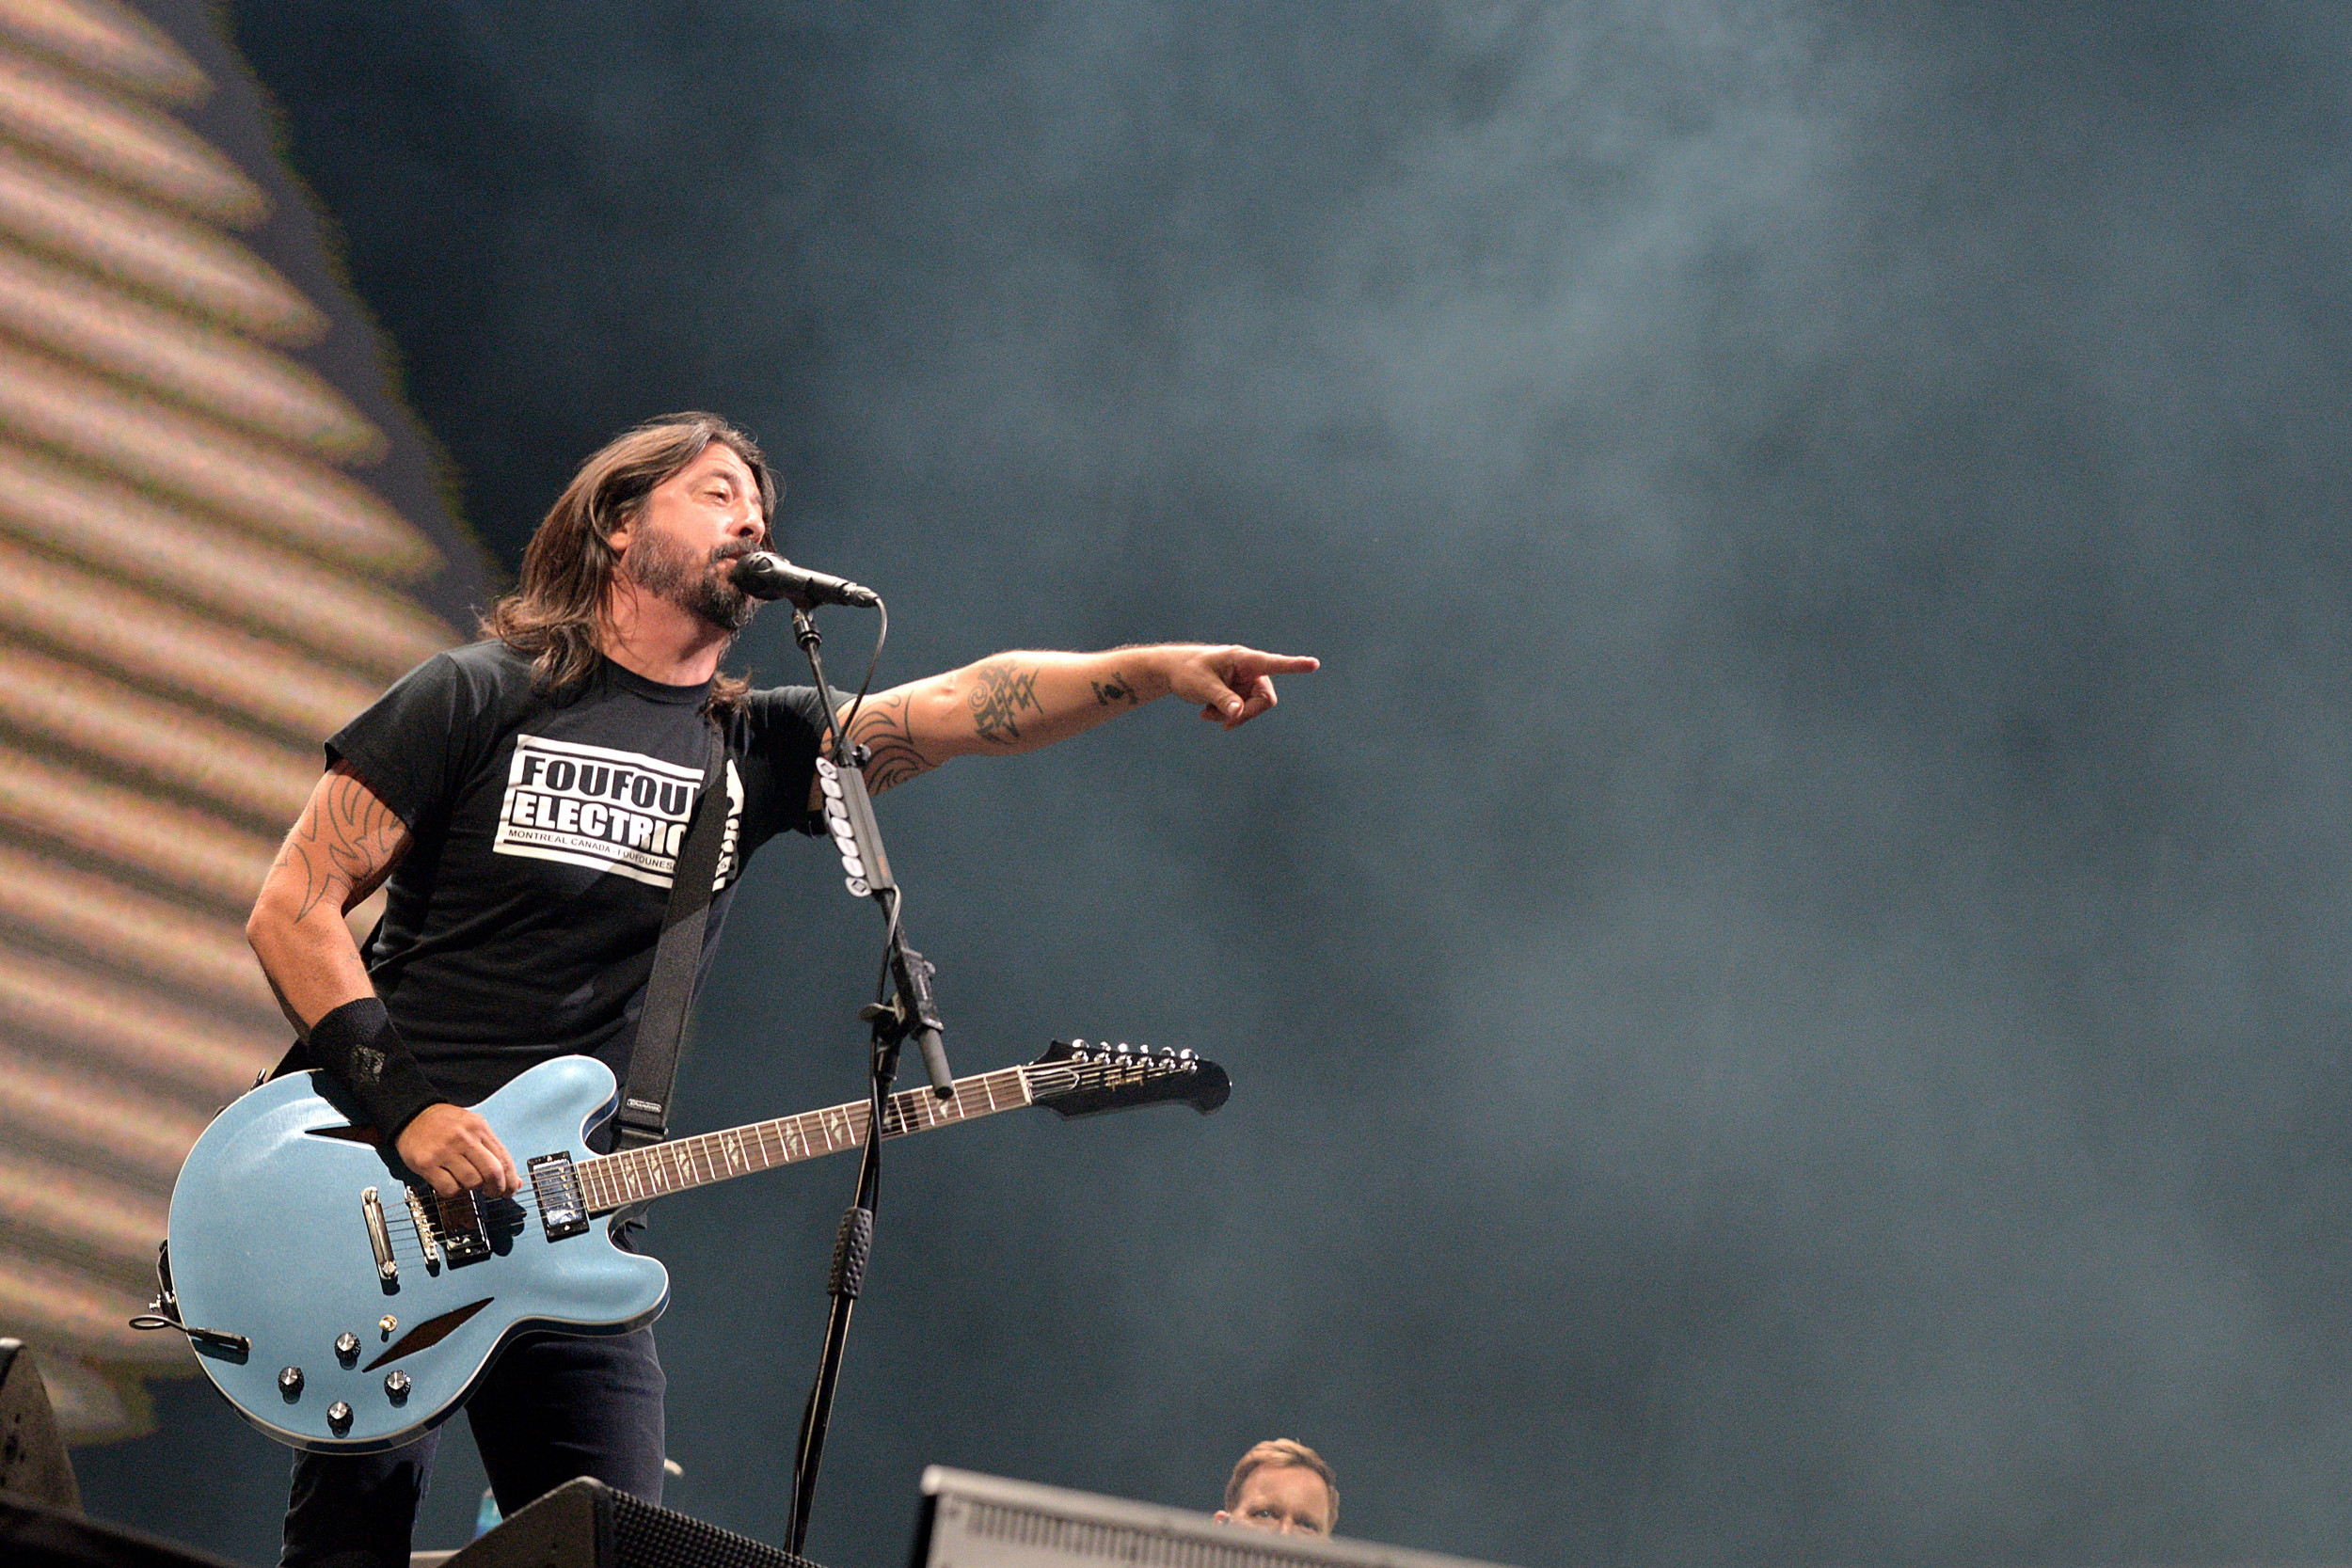 5-year-old Foo Fighters Fan Rocks Out on Stage After He's Invited Up by ...